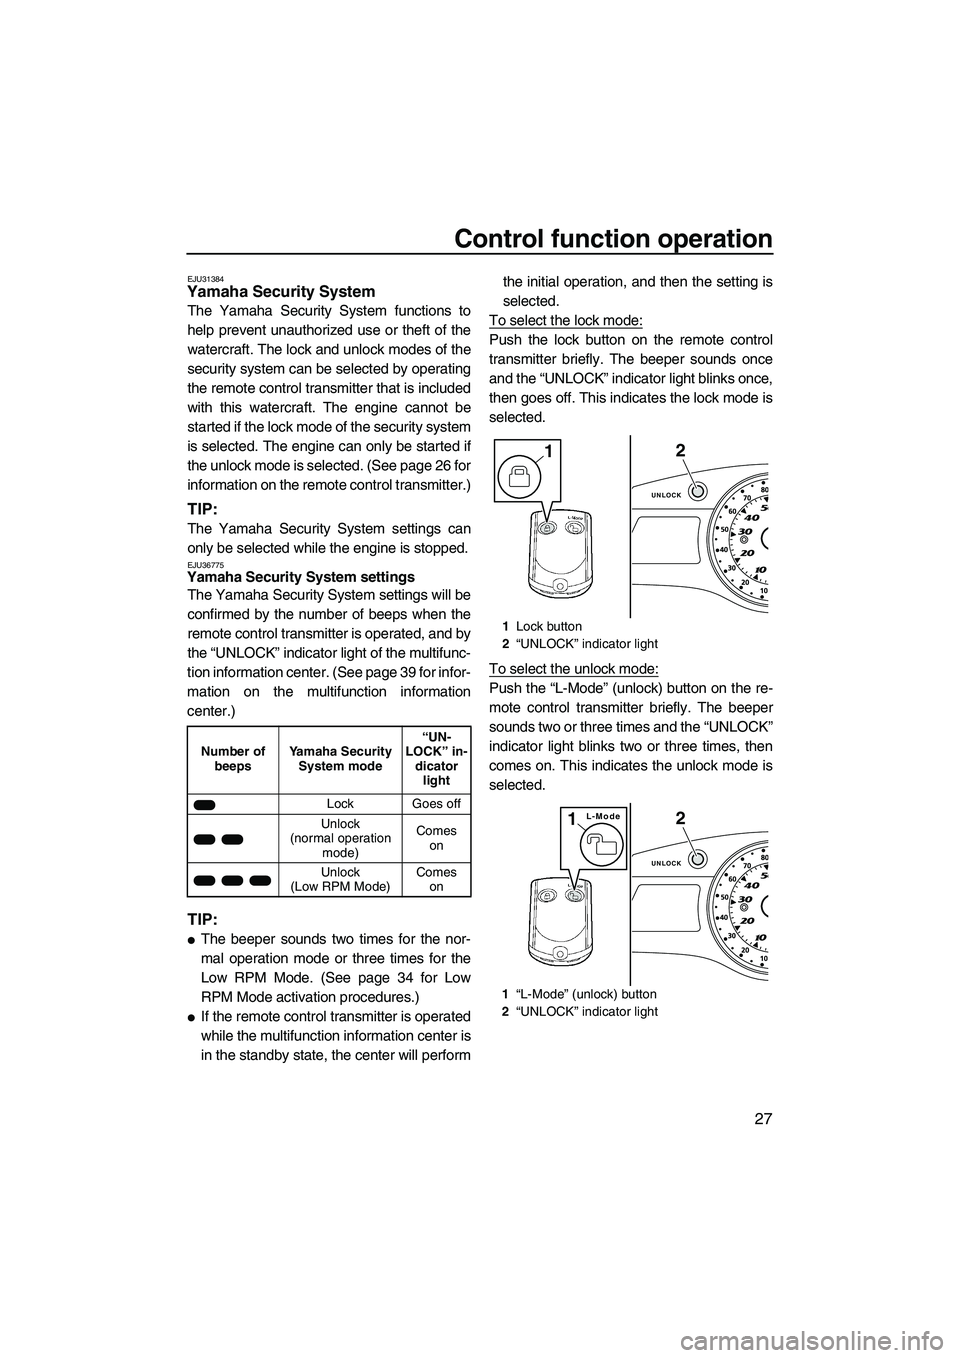 YAMAHA SVHO 2011 Owners Guide Control function operation
27
EJU31384Yamaha Security System 
The Yamaha Security System functions to
help prevent unauthorized use or theft of the
watercraft. The lock and unlock modes of the
securit